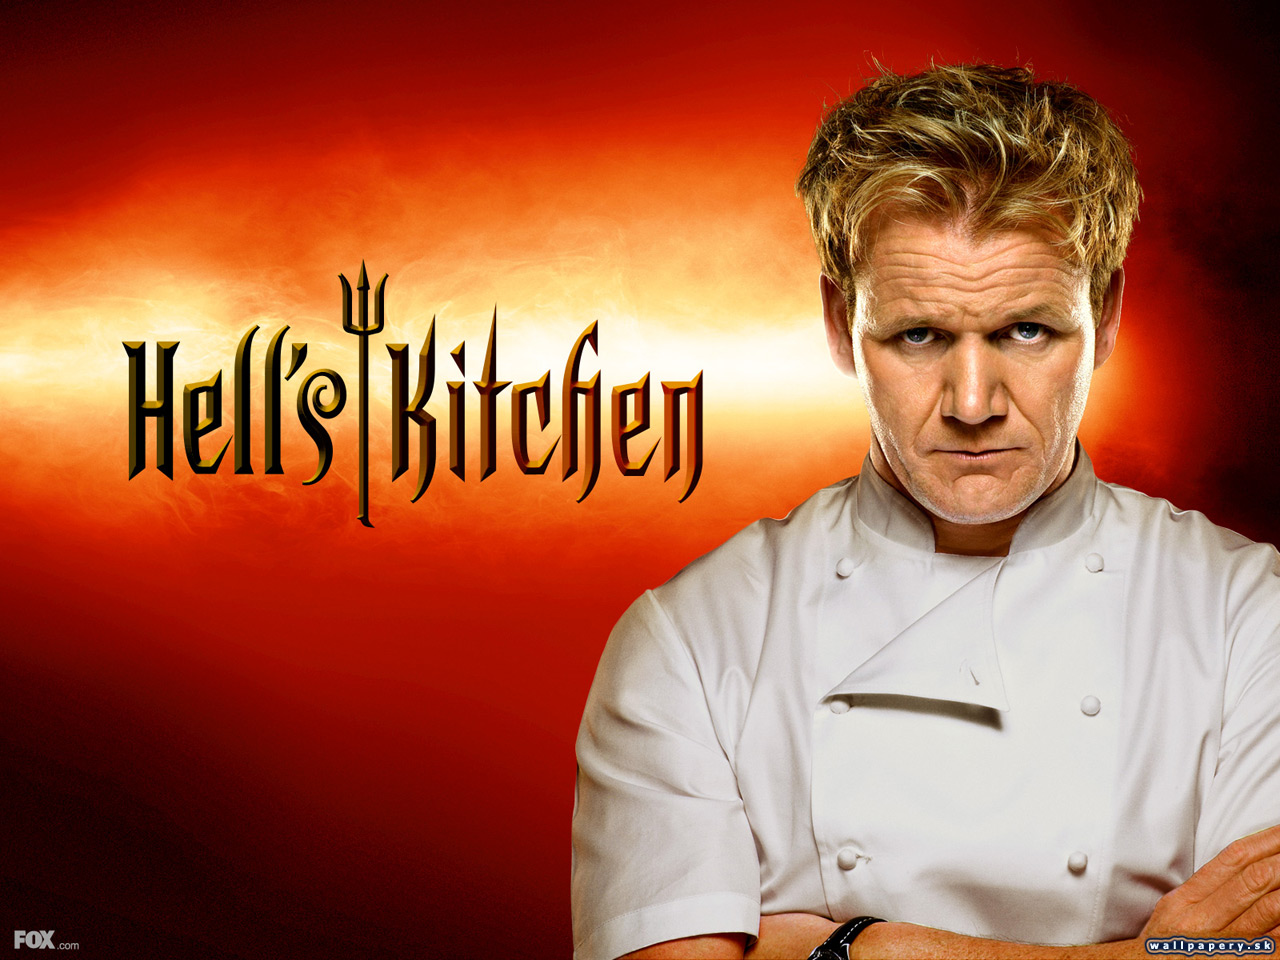 Hells Kitchen: The Video Game - wallpaper 1